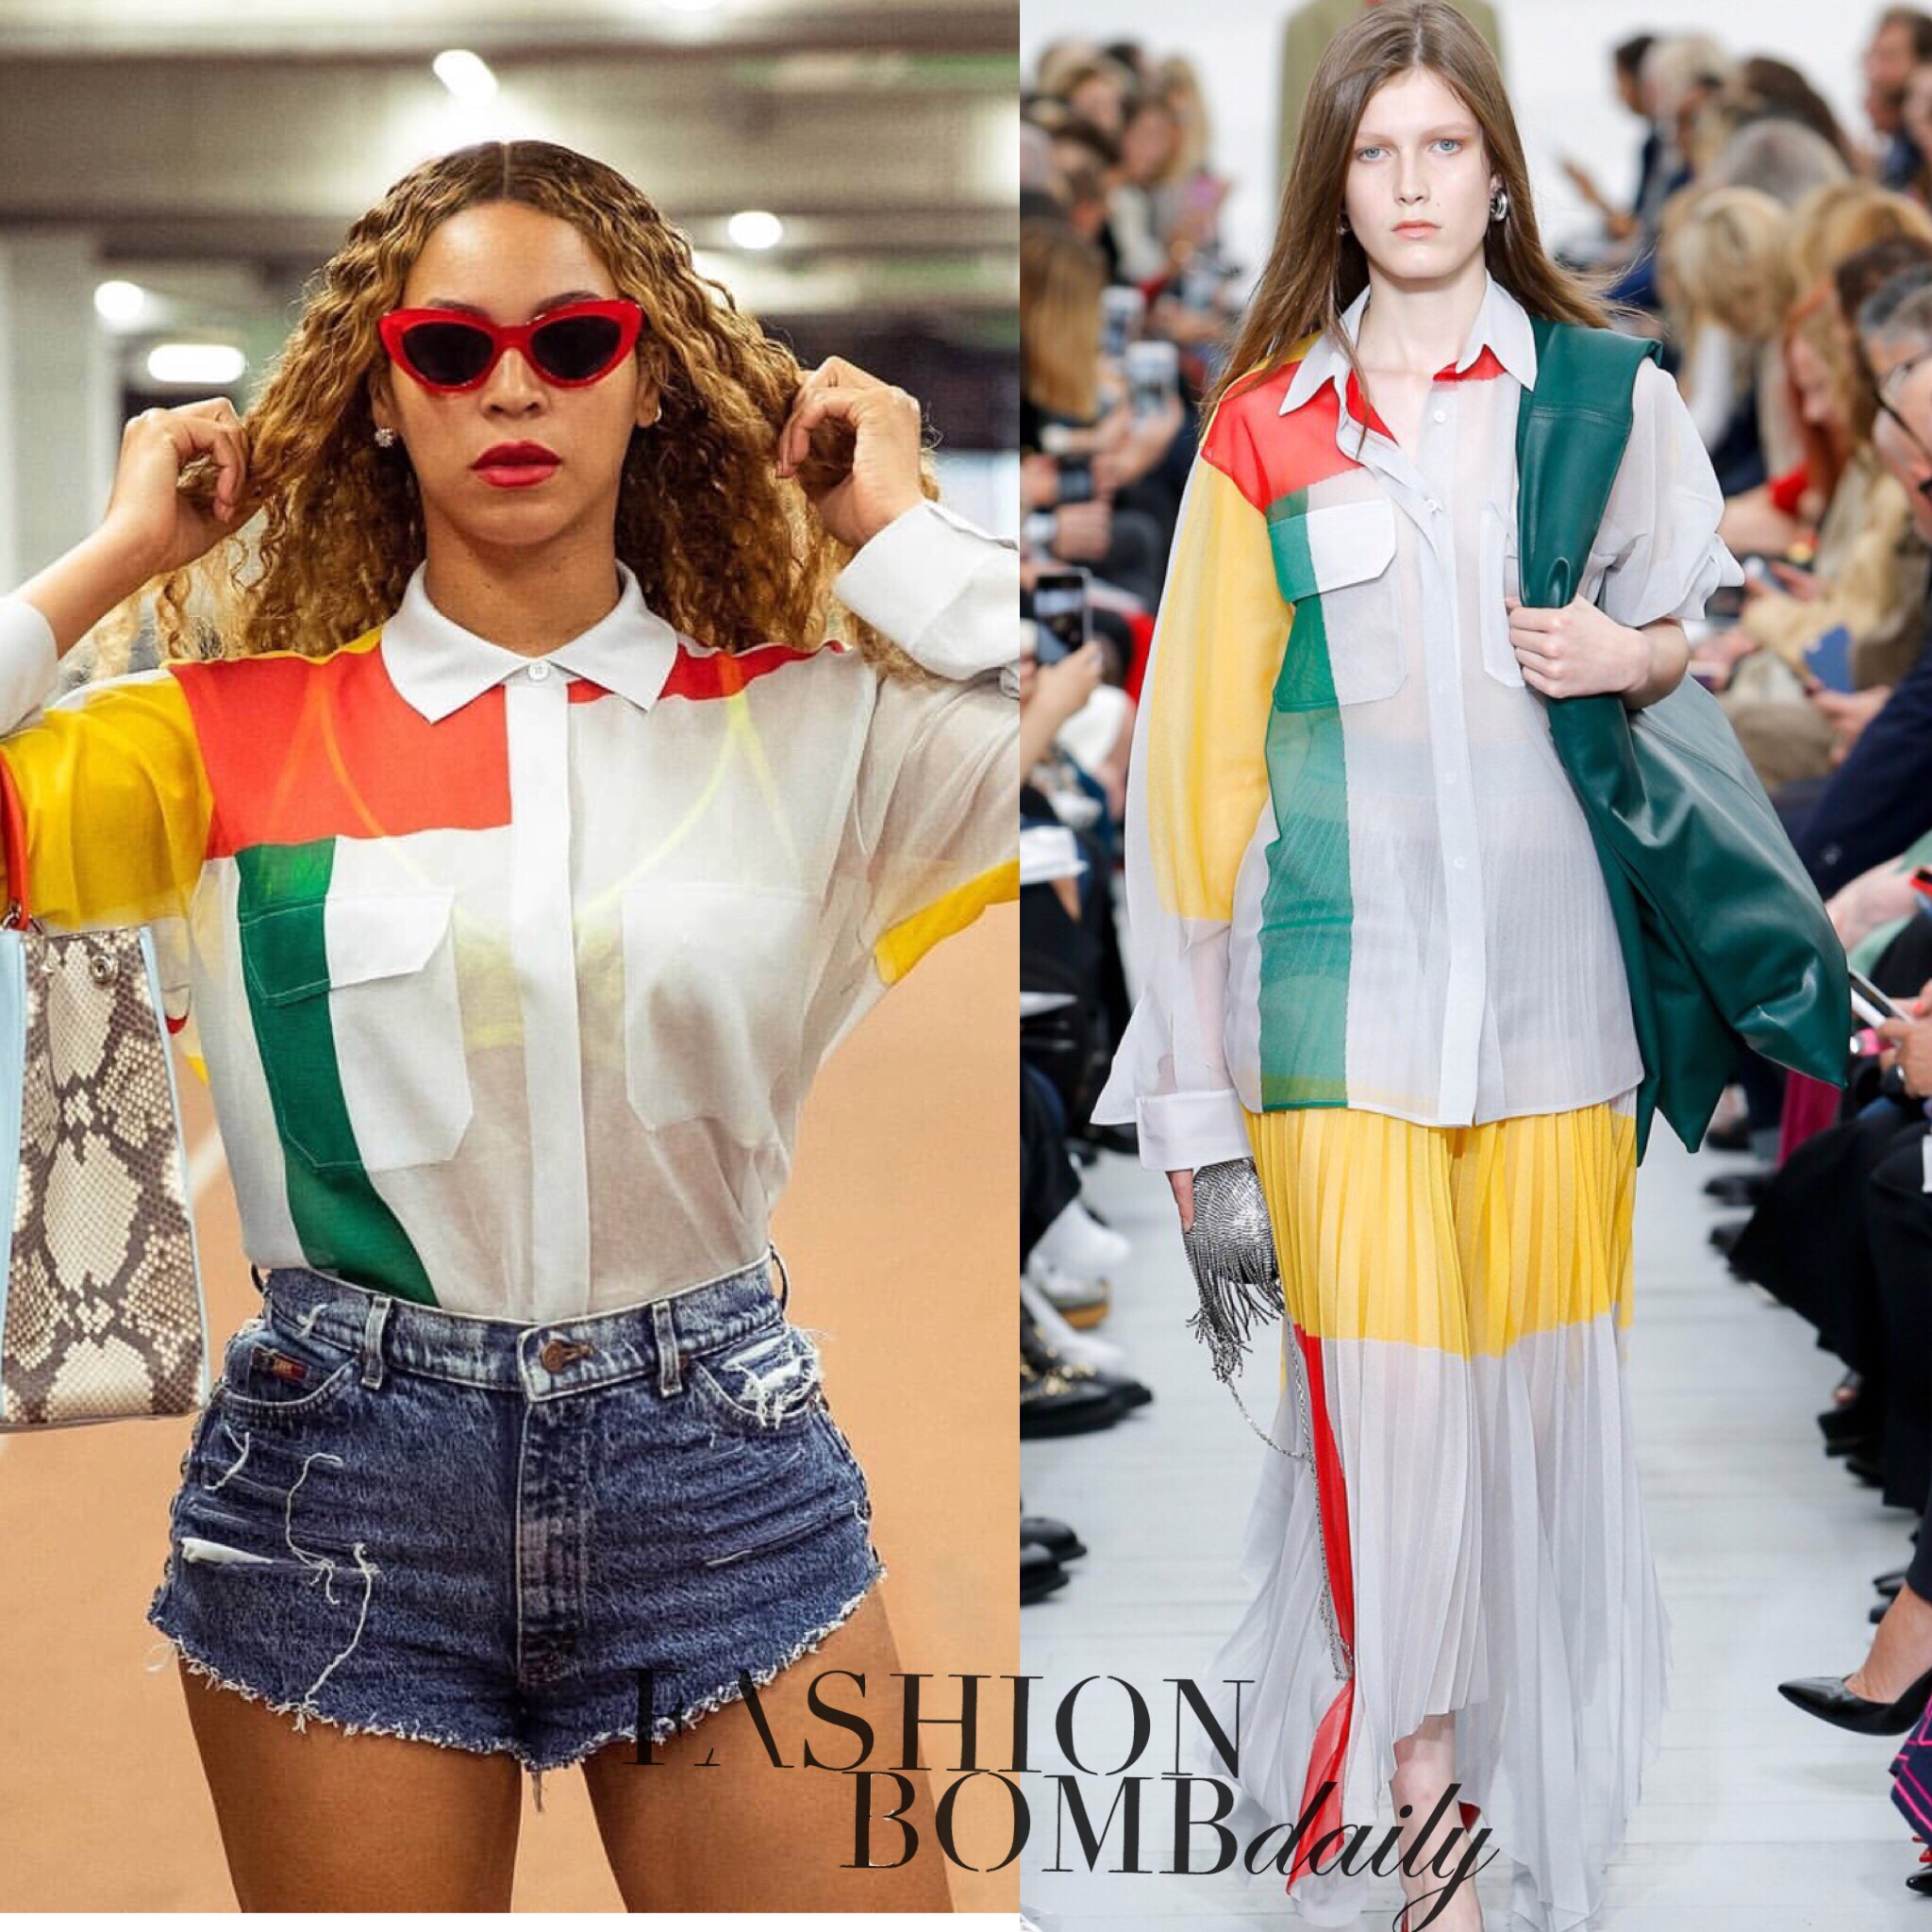 Beyonce Poses for the 'Gram in a Celine Spring 2018 Colorblock